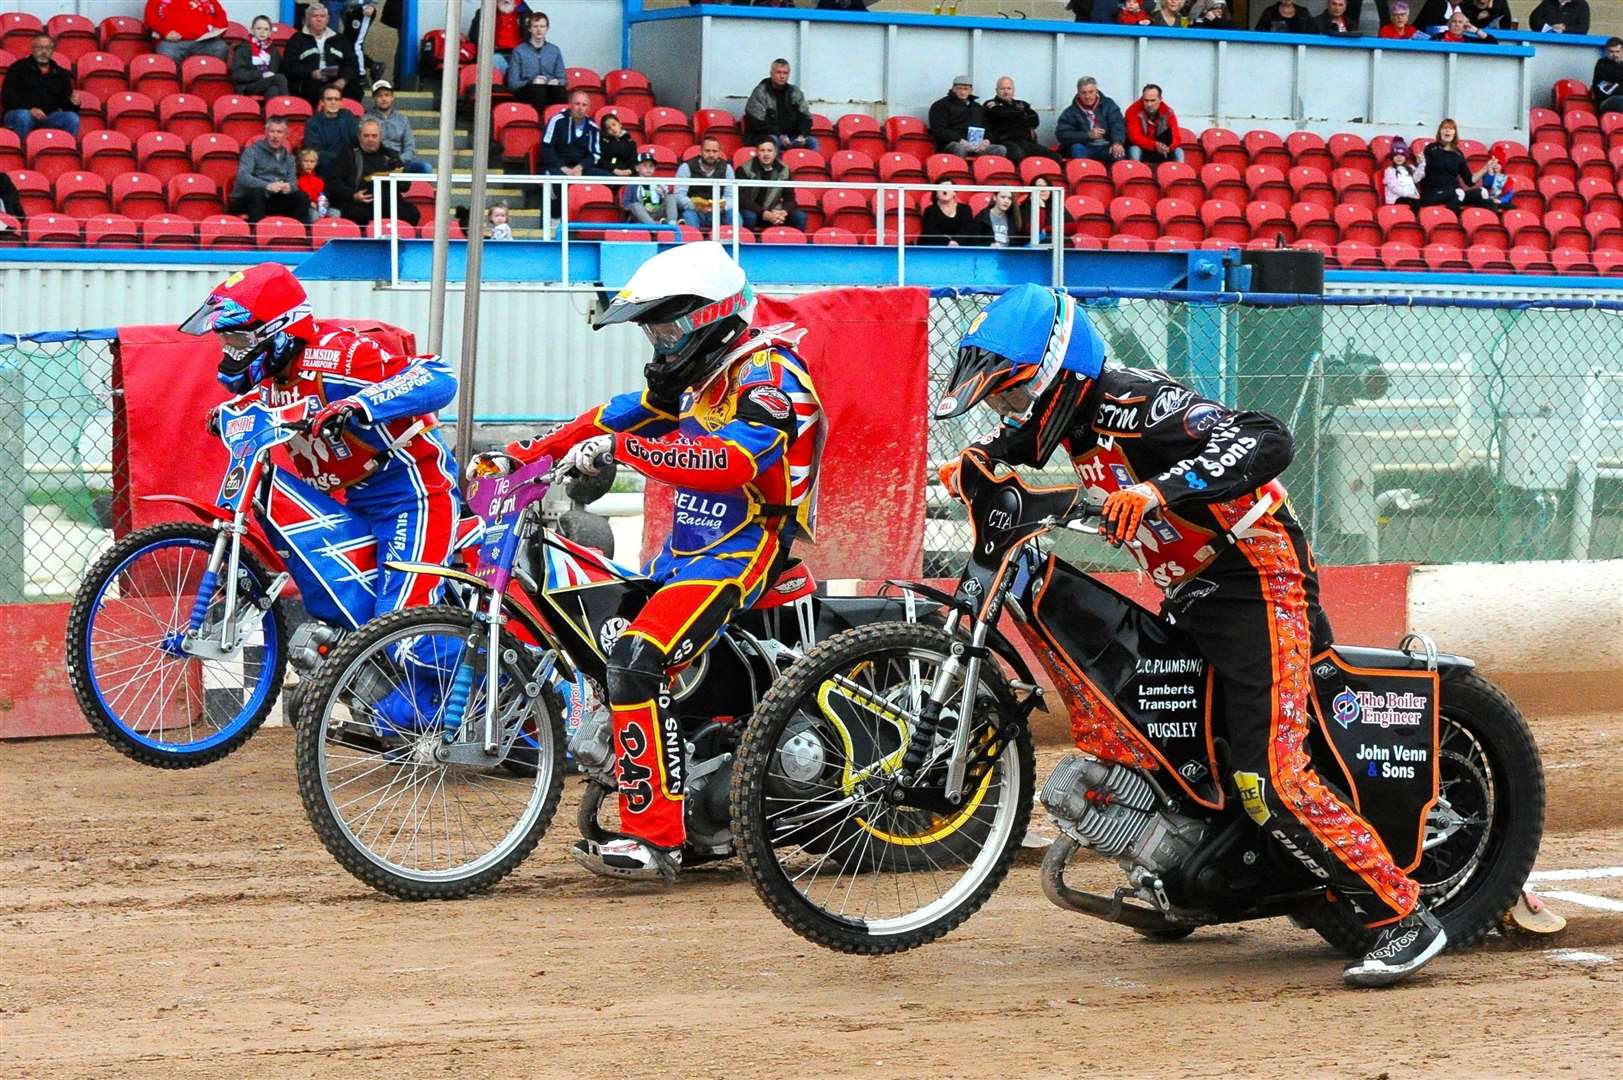 Professional league speedway in the UK has been cancelled for 2020